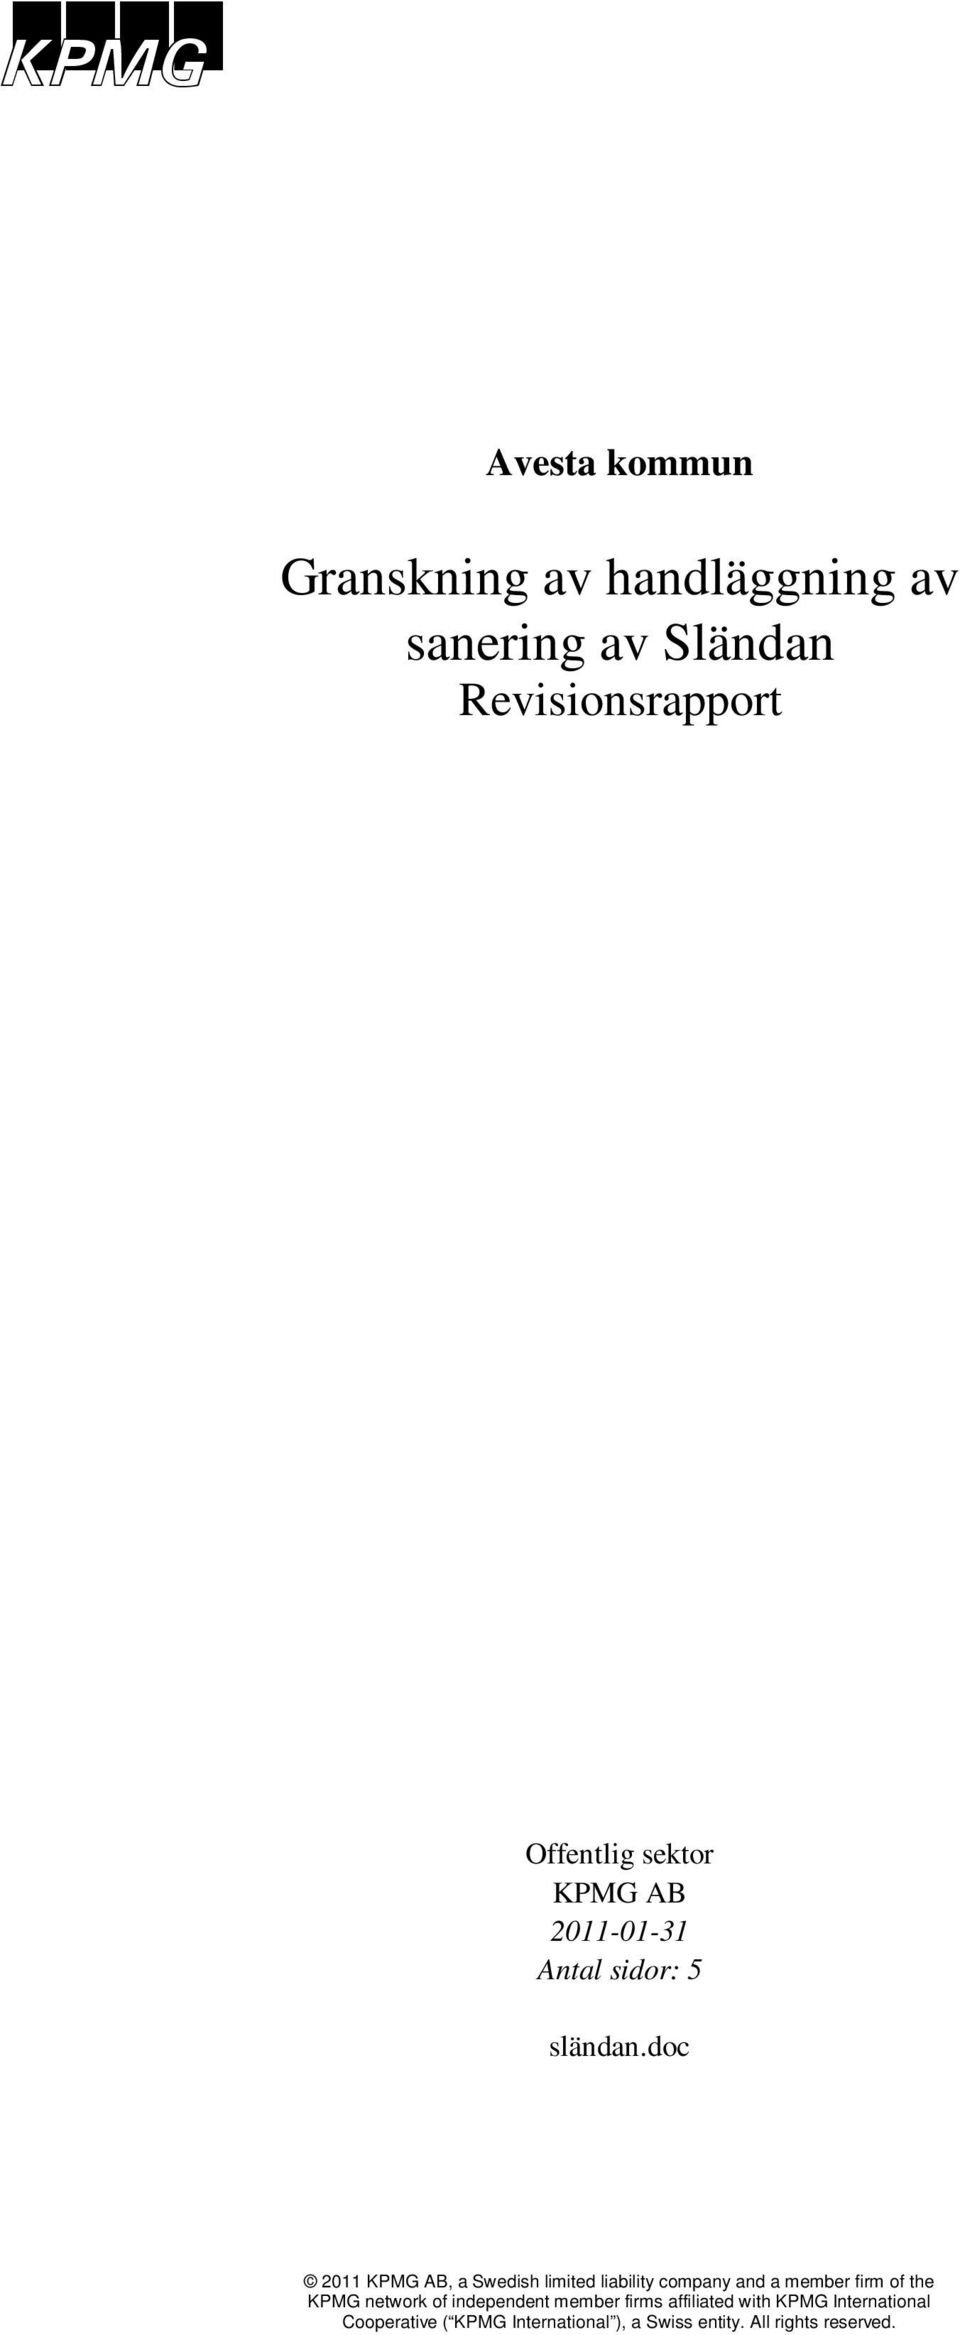 Revisionsrapport Offentlig